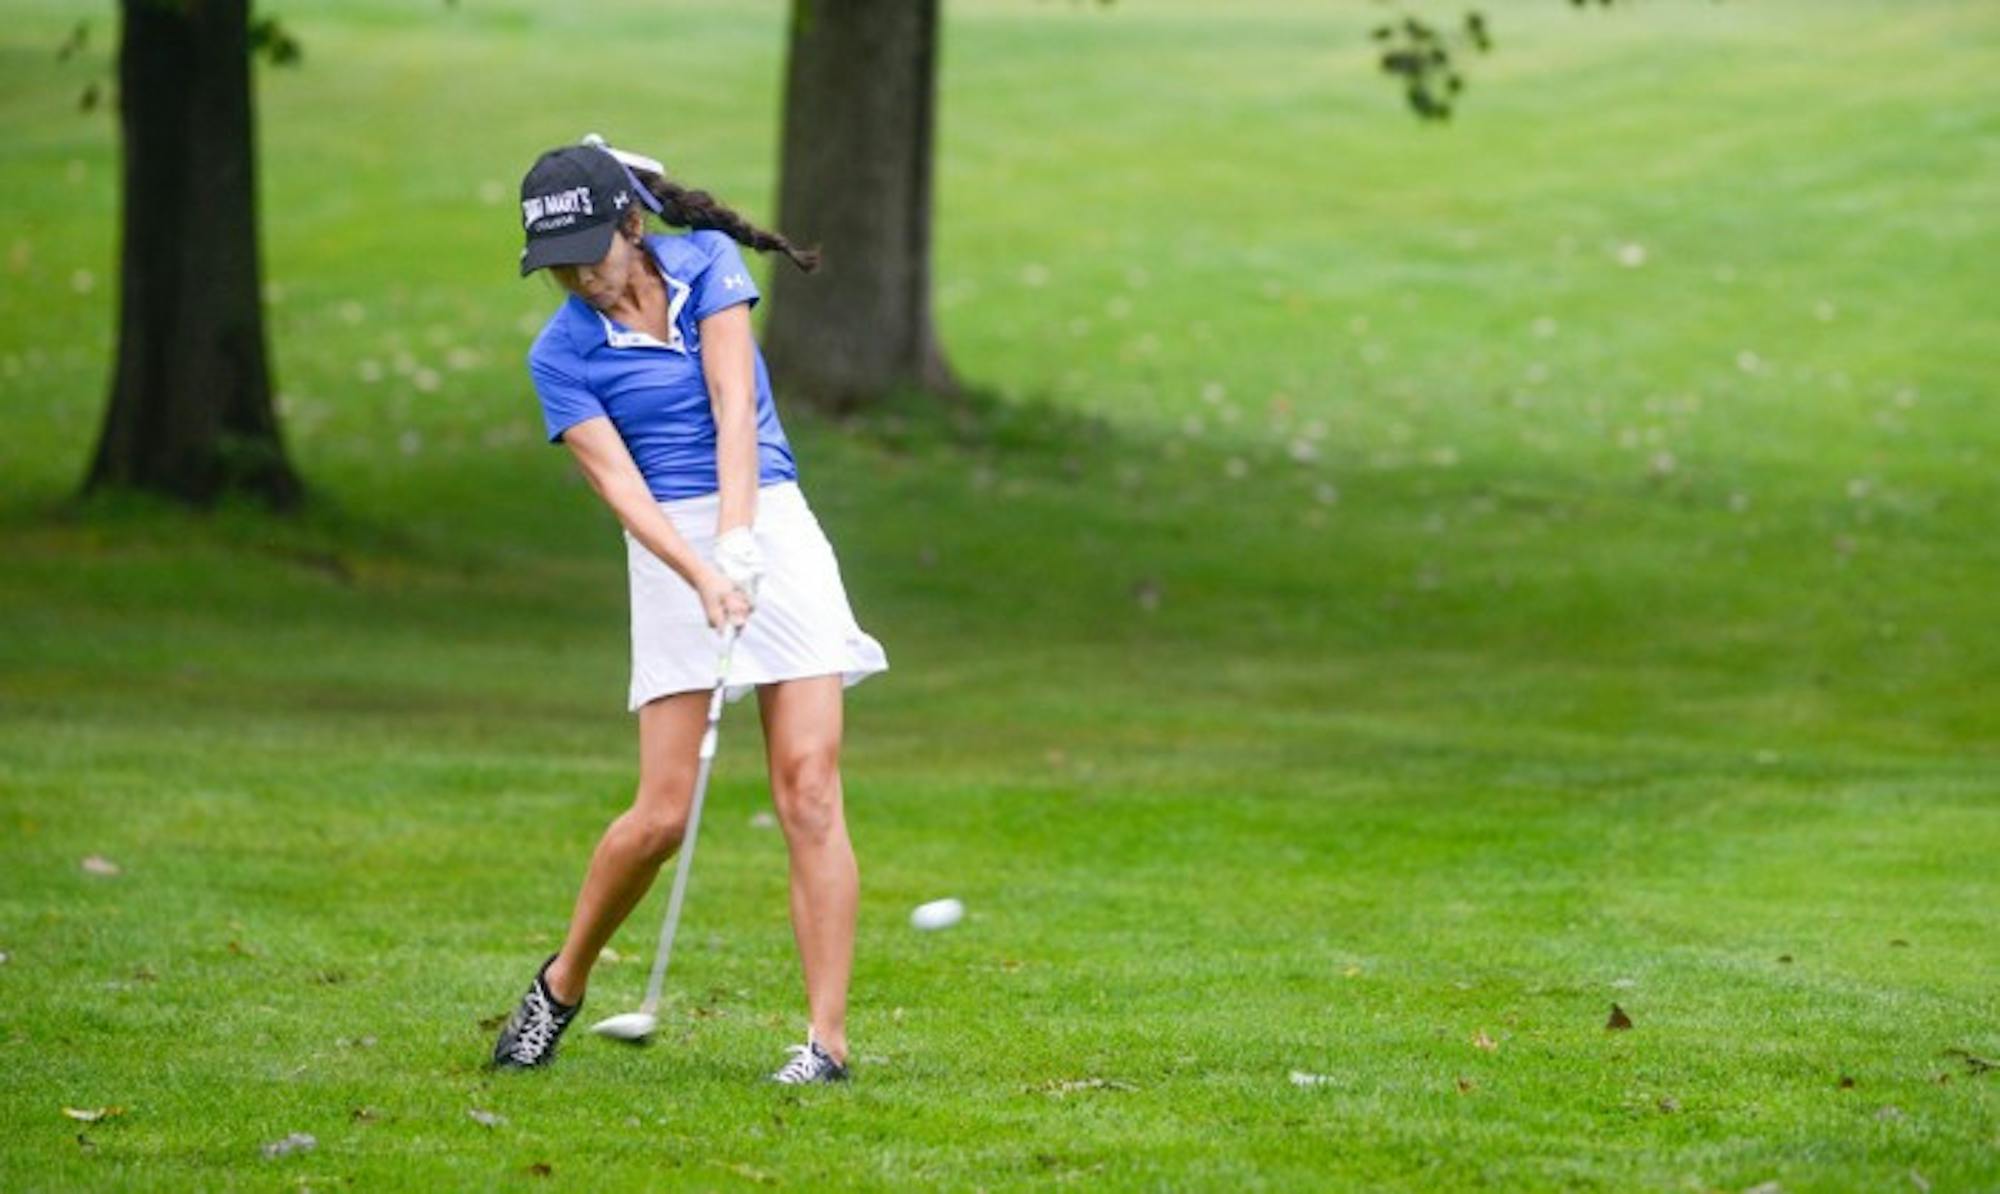 Freshman Patty Meza hits the ball during the Michiana Crosstown Clash at Elbel Golf Course in South Bend on Aug. 29.